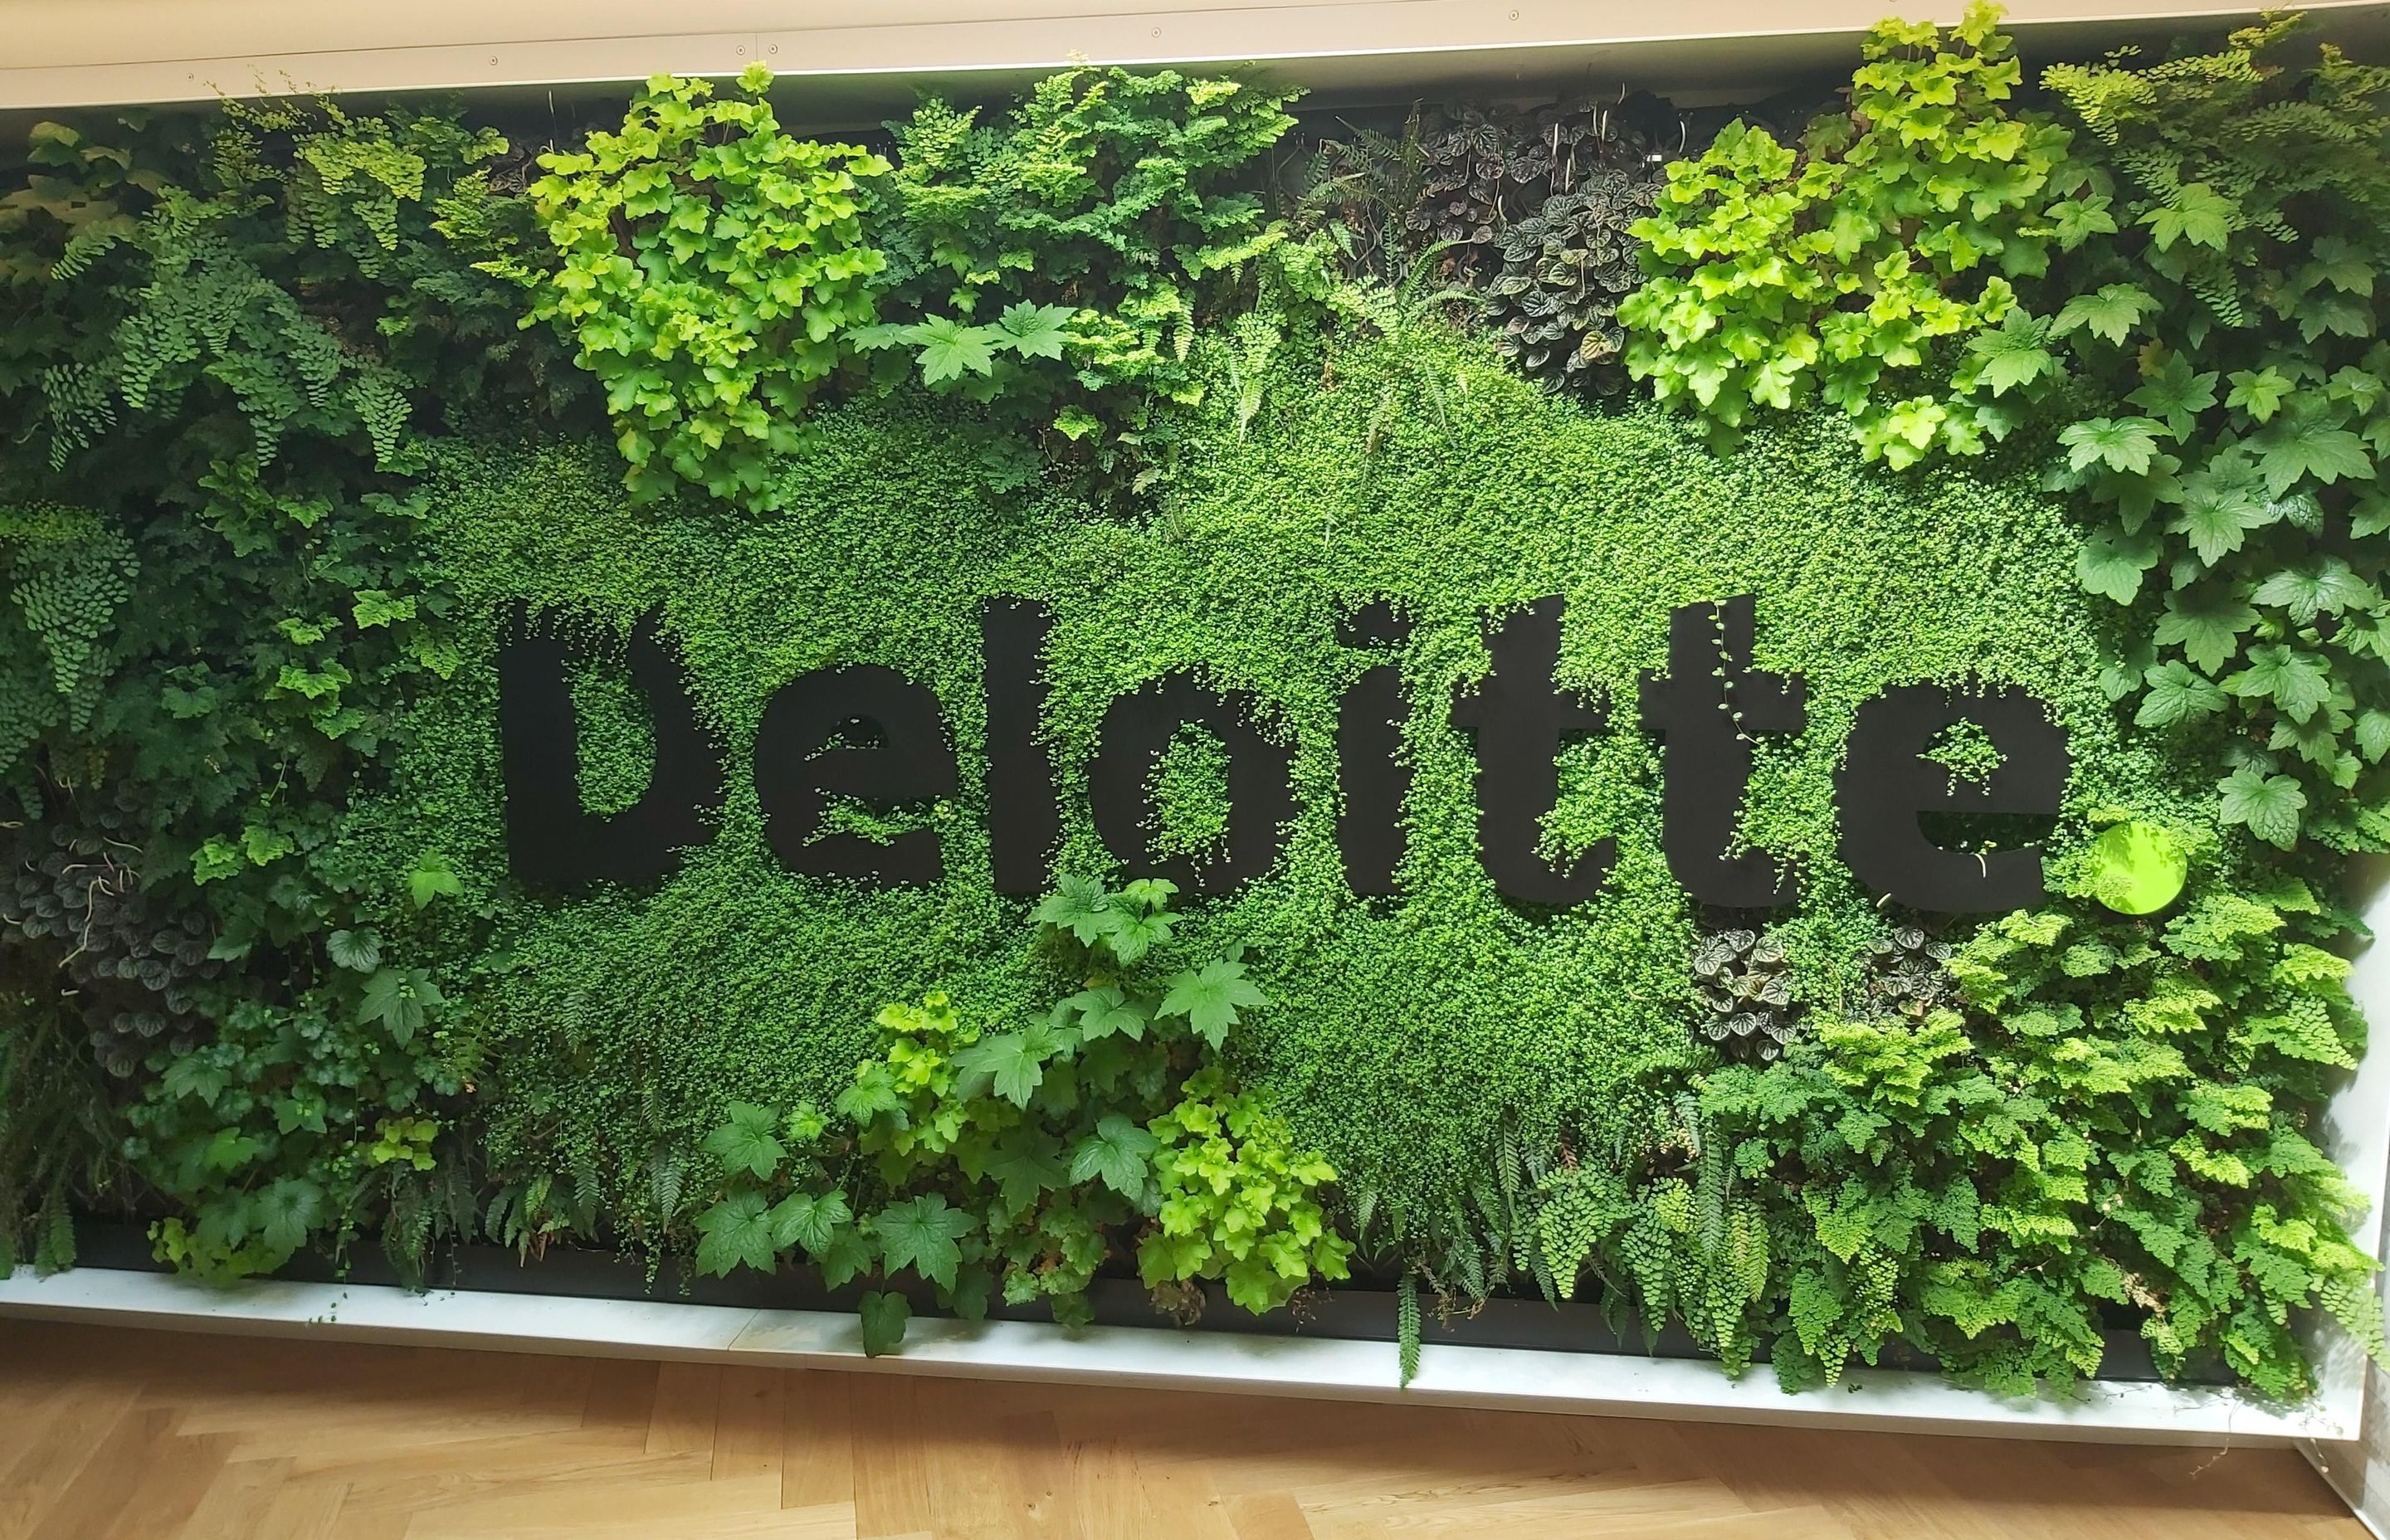 A branded plant wall for Deloitte, installed by Natural Habitats.